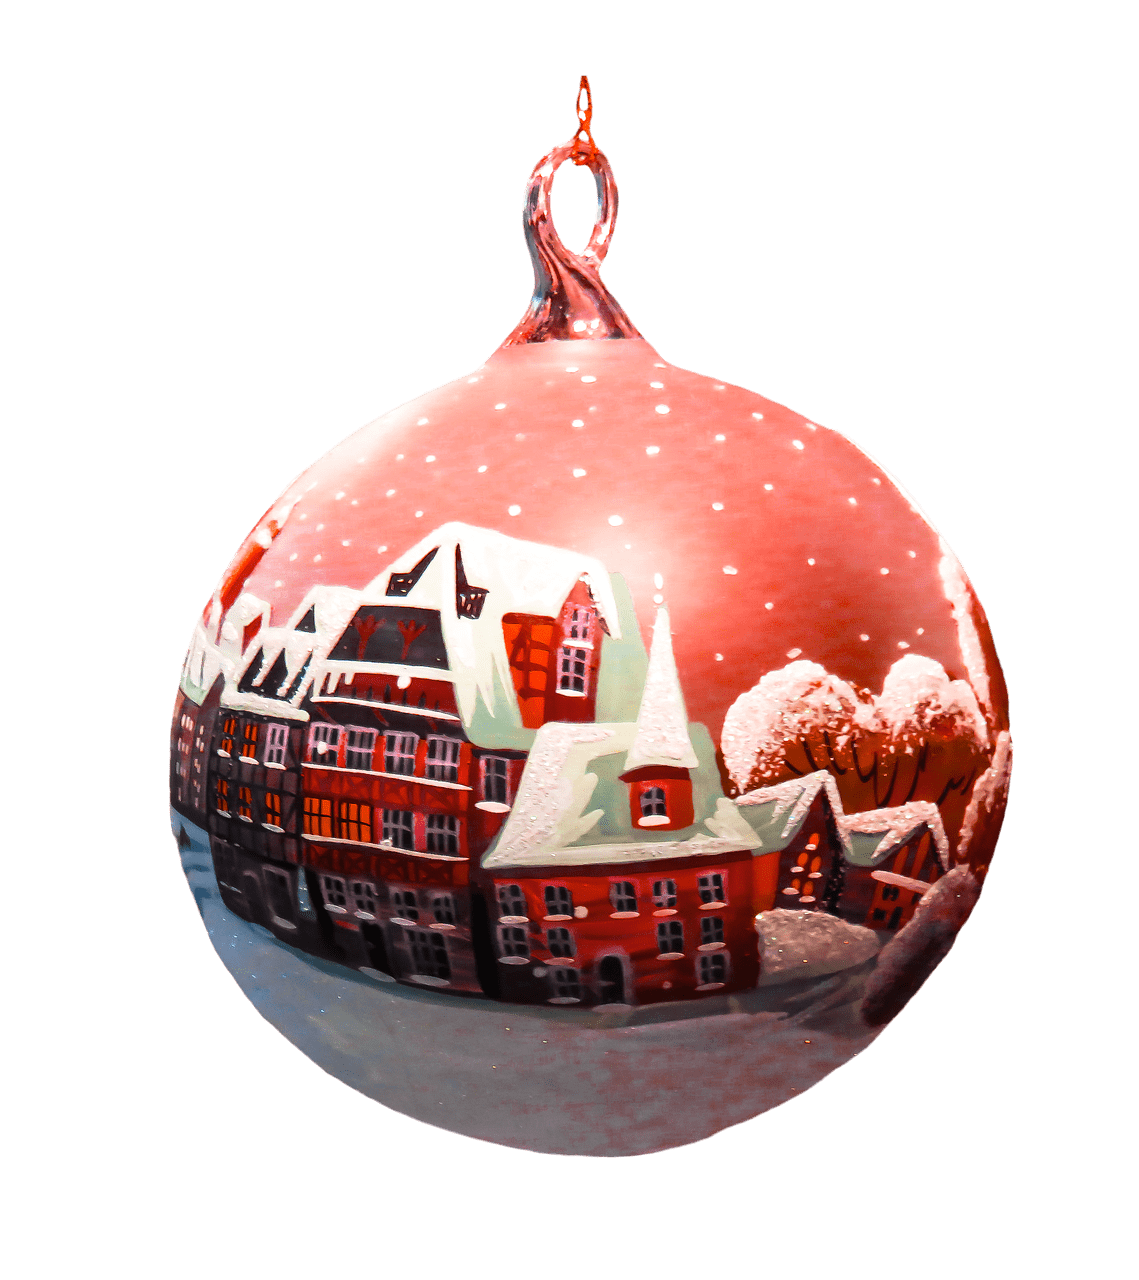 Download PNG image - Red Christmas Bauble PNG Transparent Image 